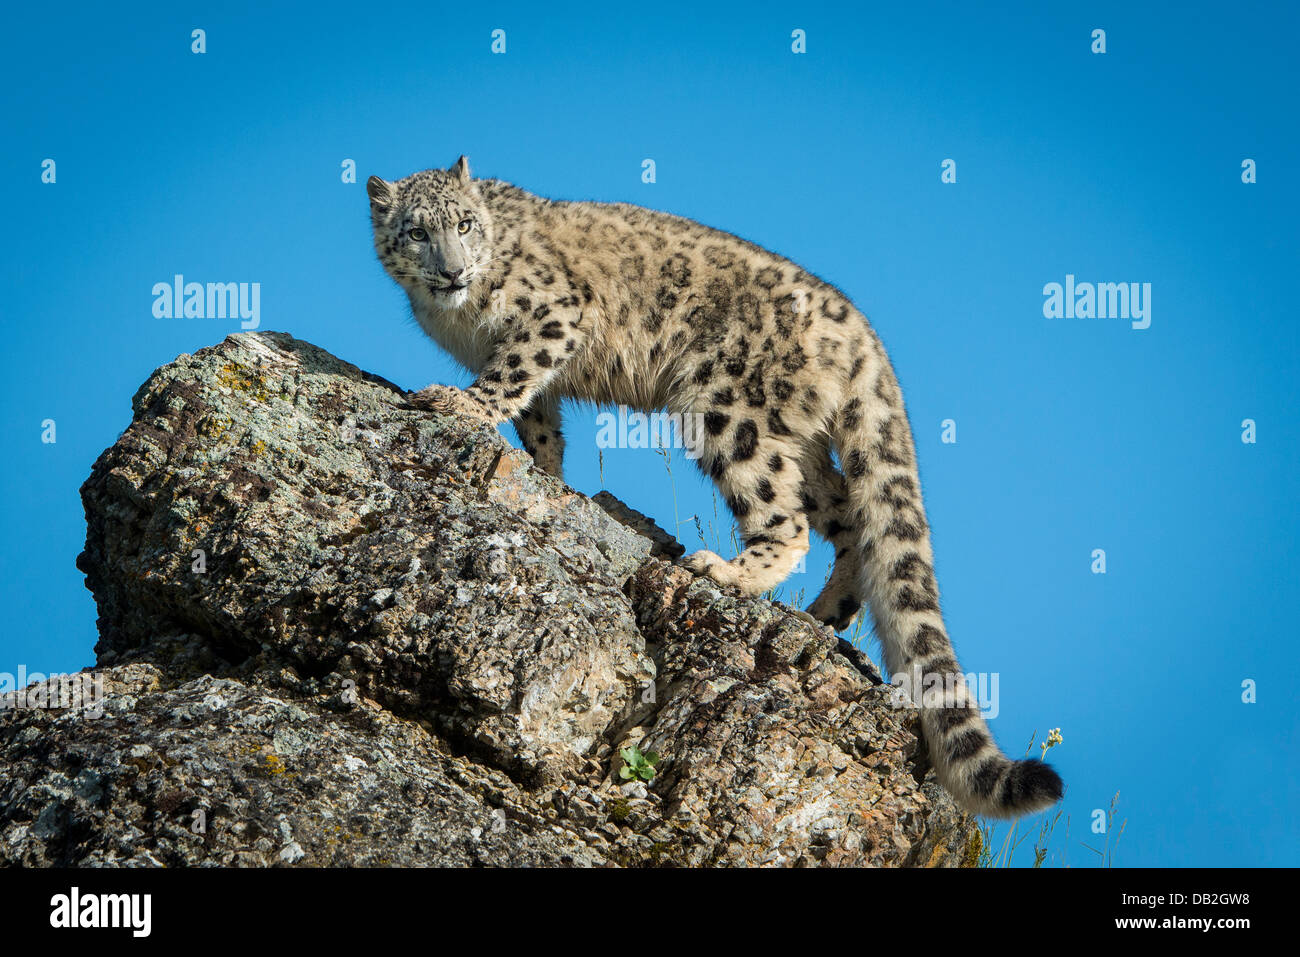 Snow Leopard looking down from cliffs edge Stock Photo